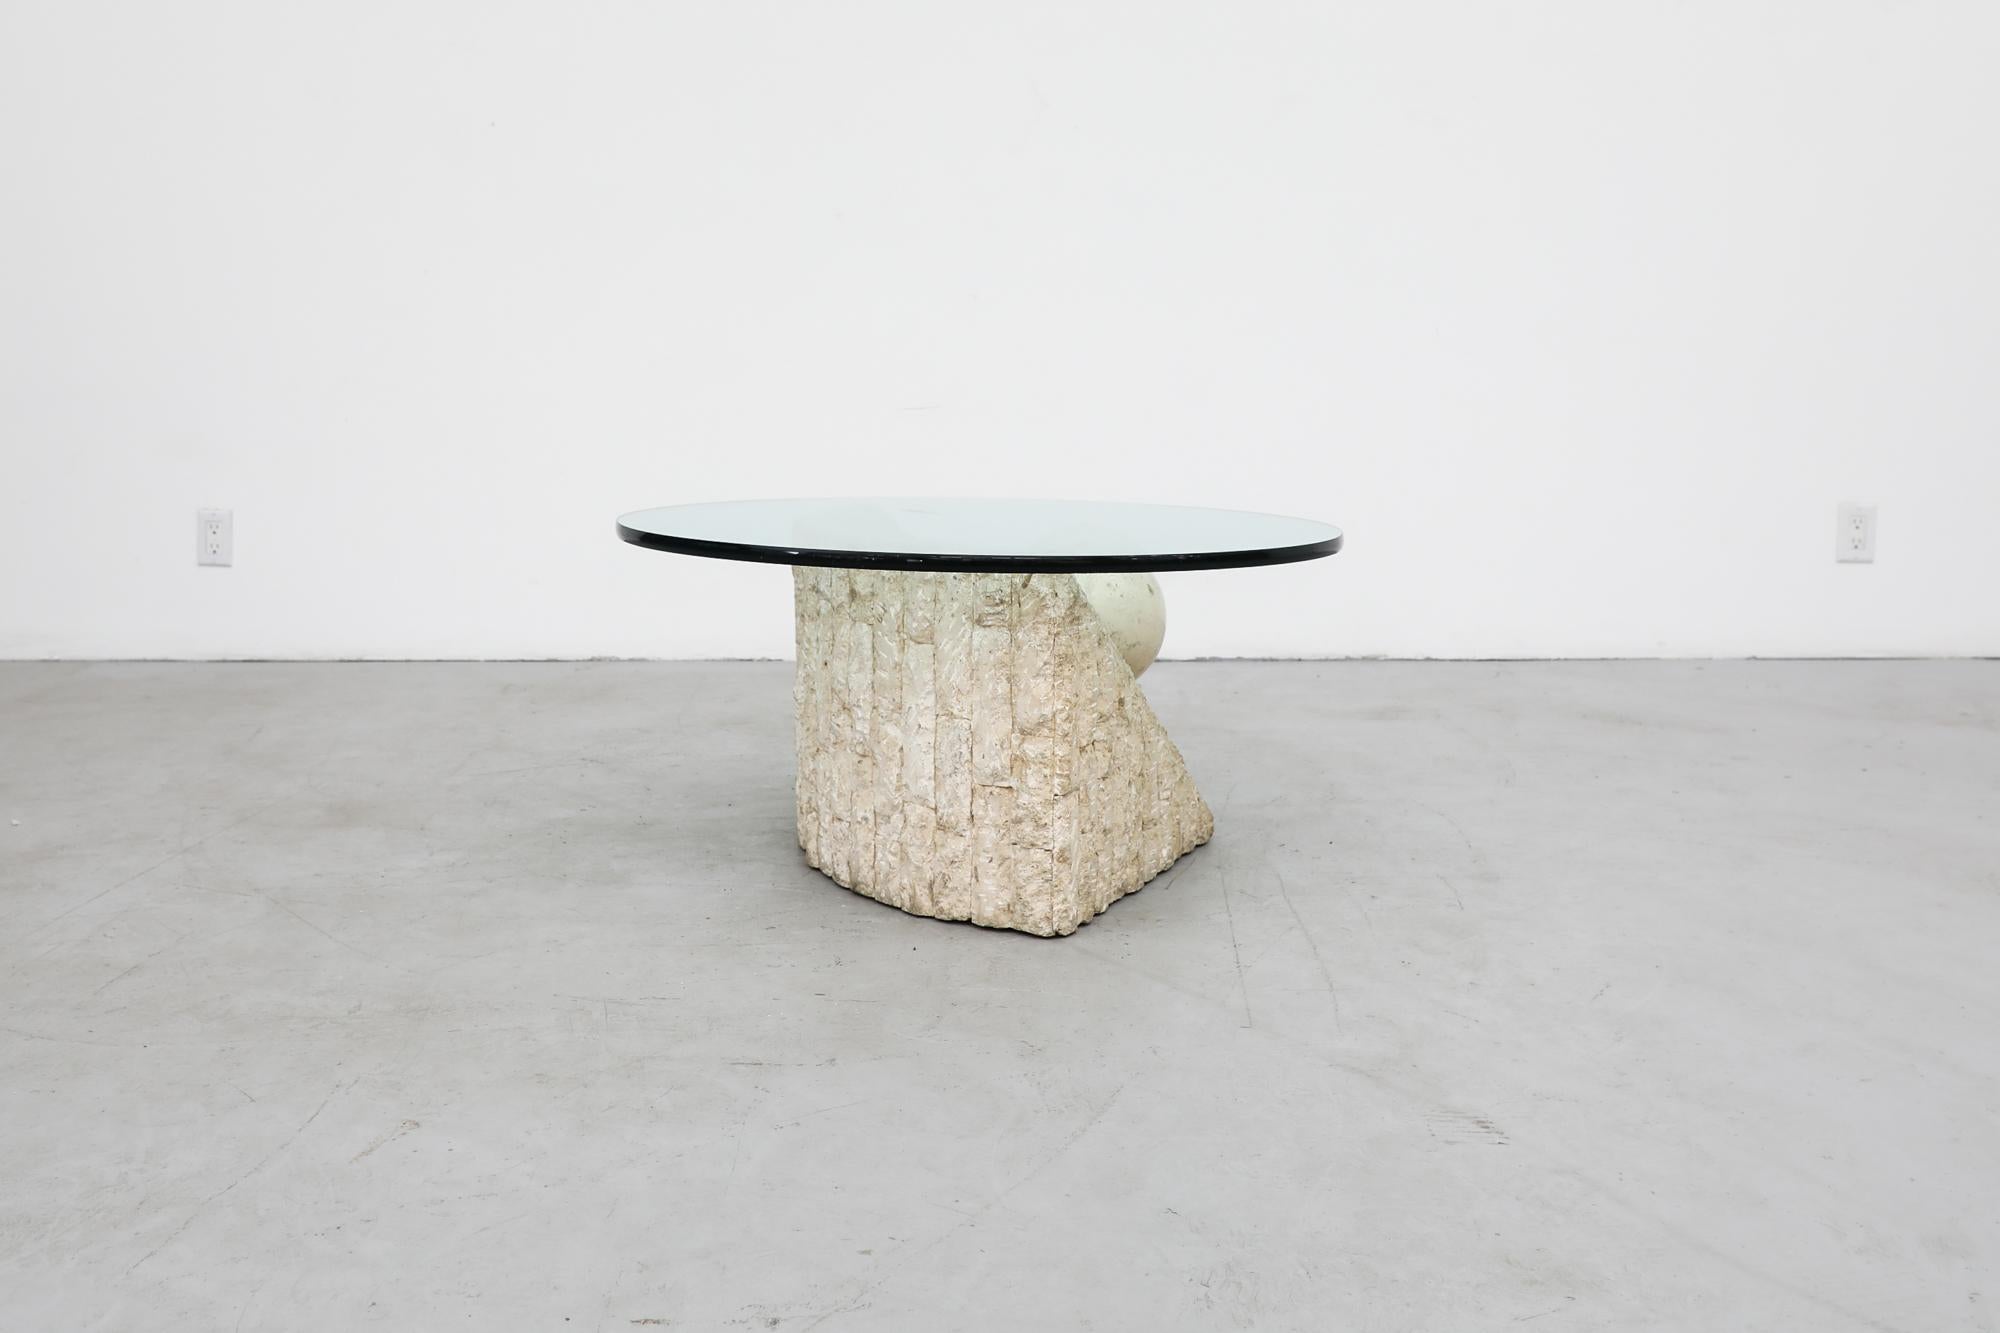 Late 20th Century Post-Modern Tessellated Stone Coffee Table with Glass by Magnussen Ponte, 1995 For Sale